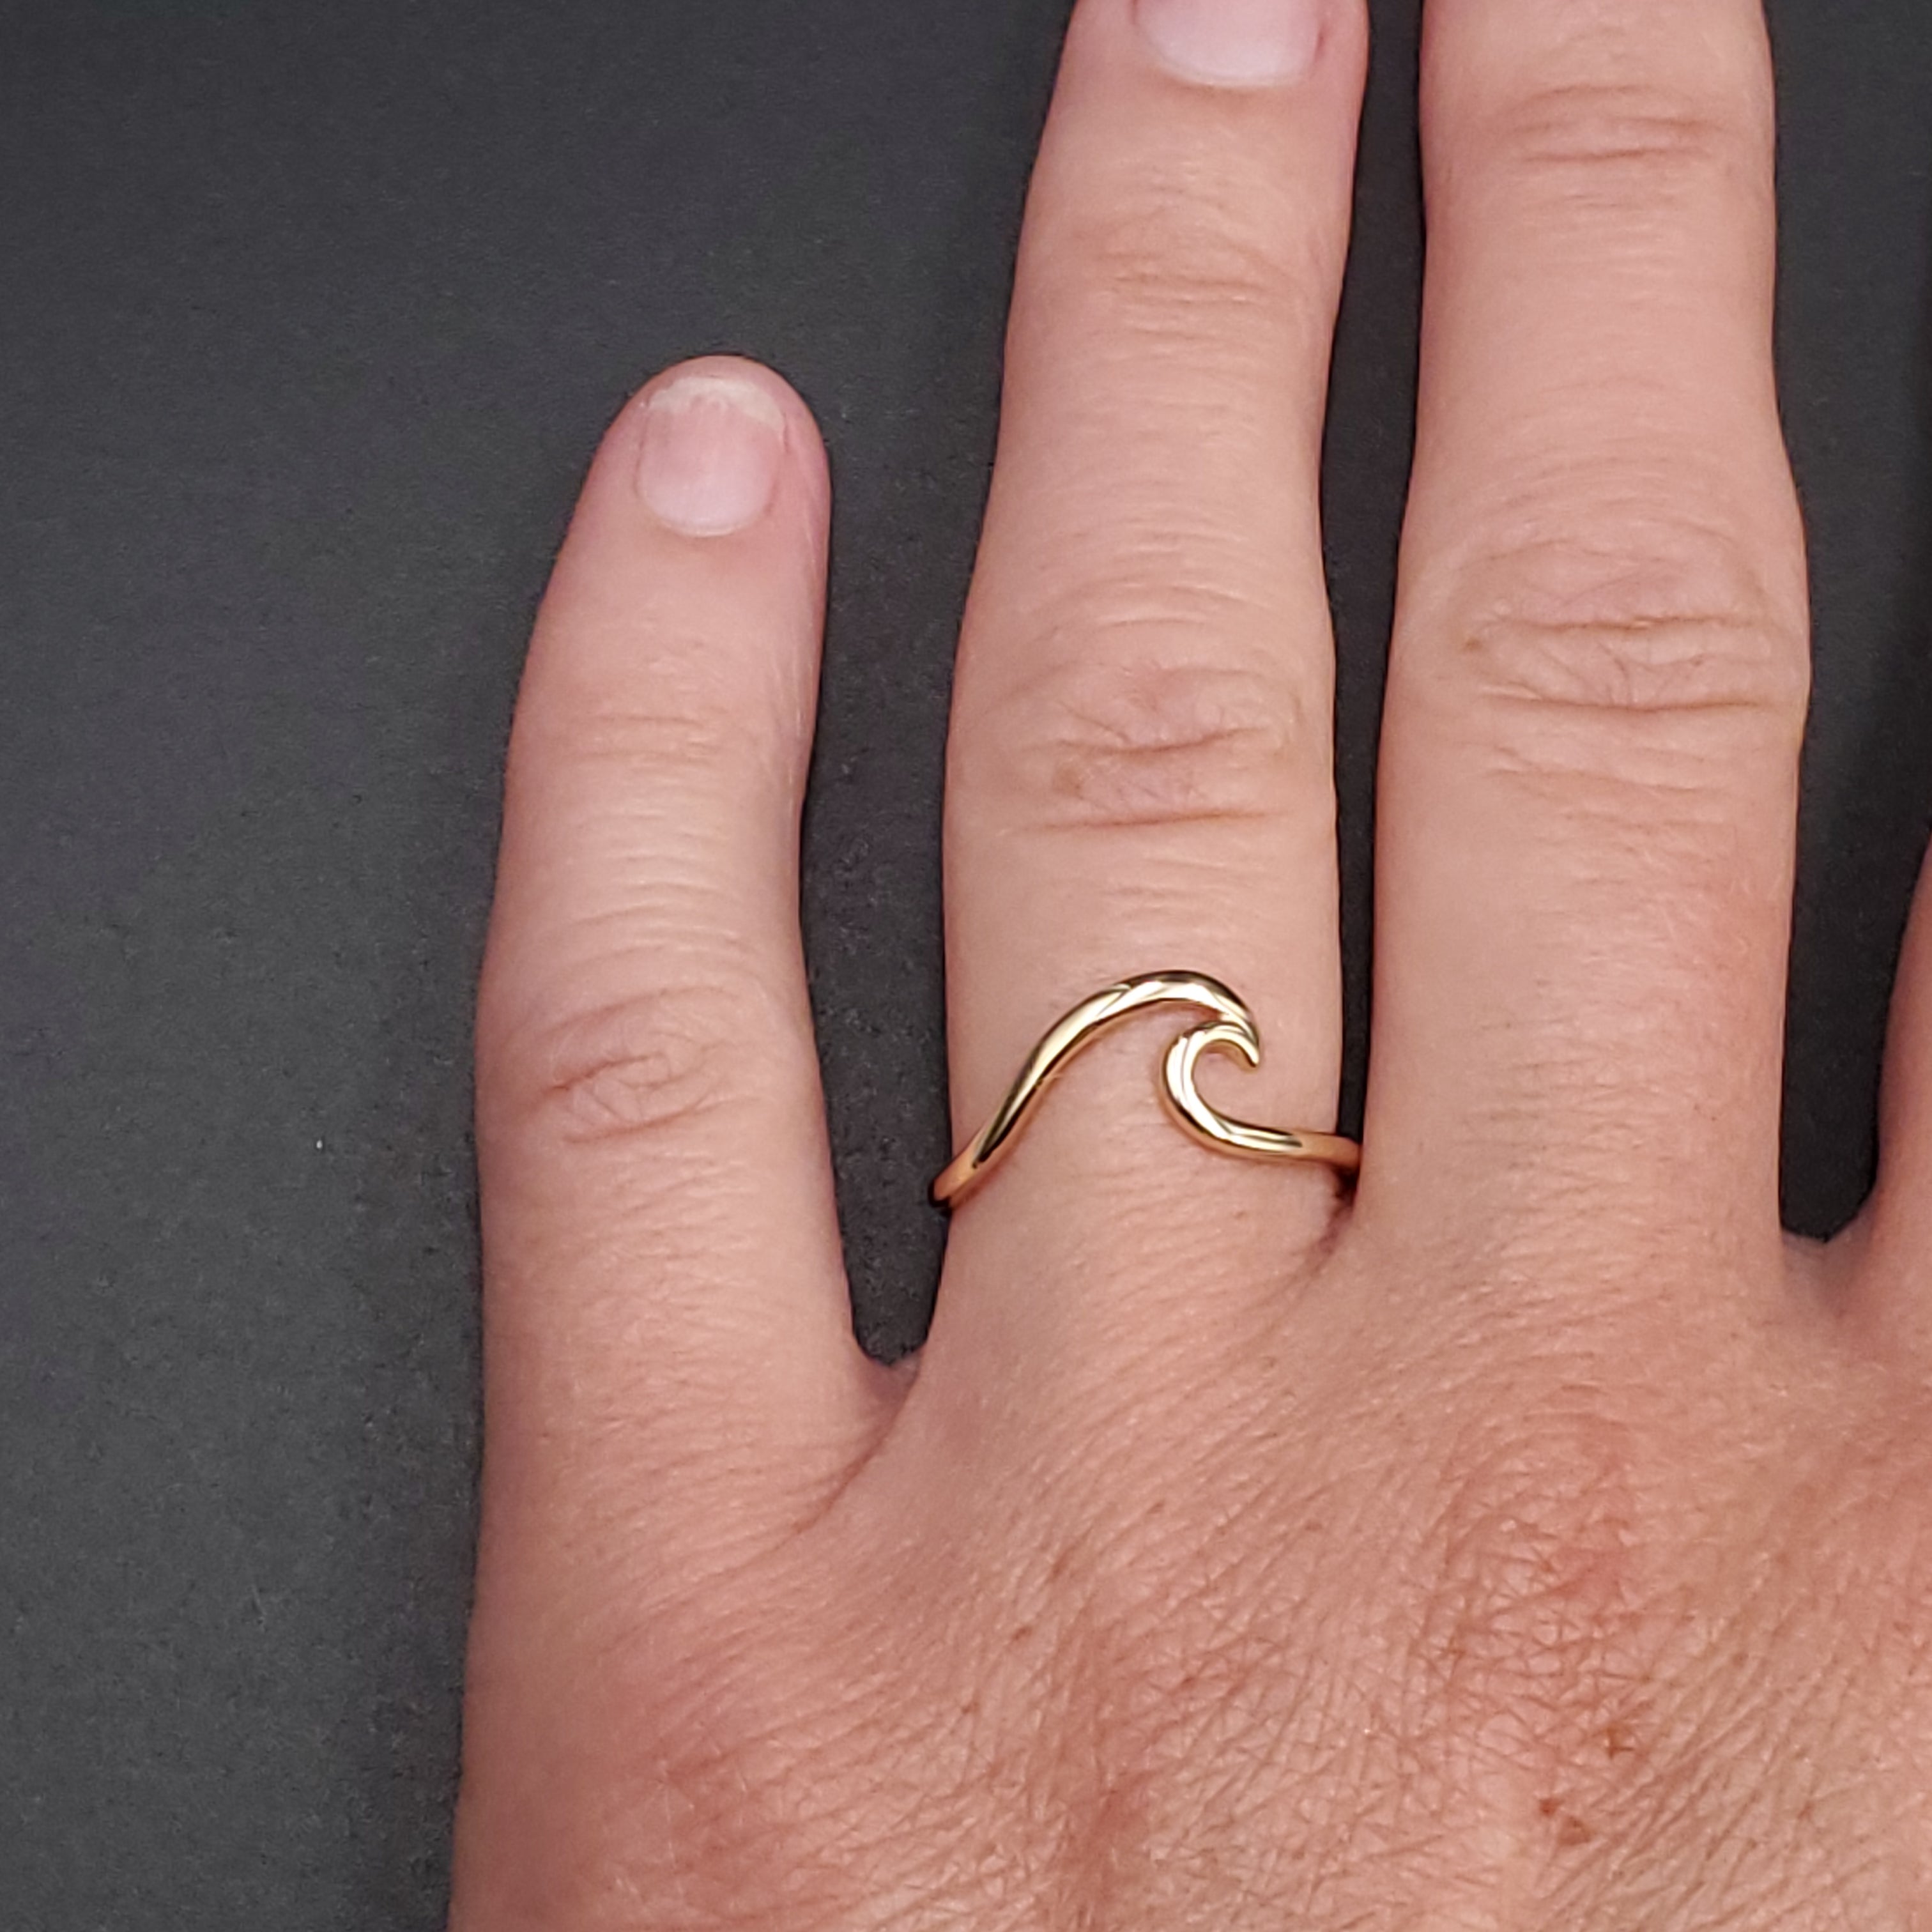 Gold wave ring shown on hand